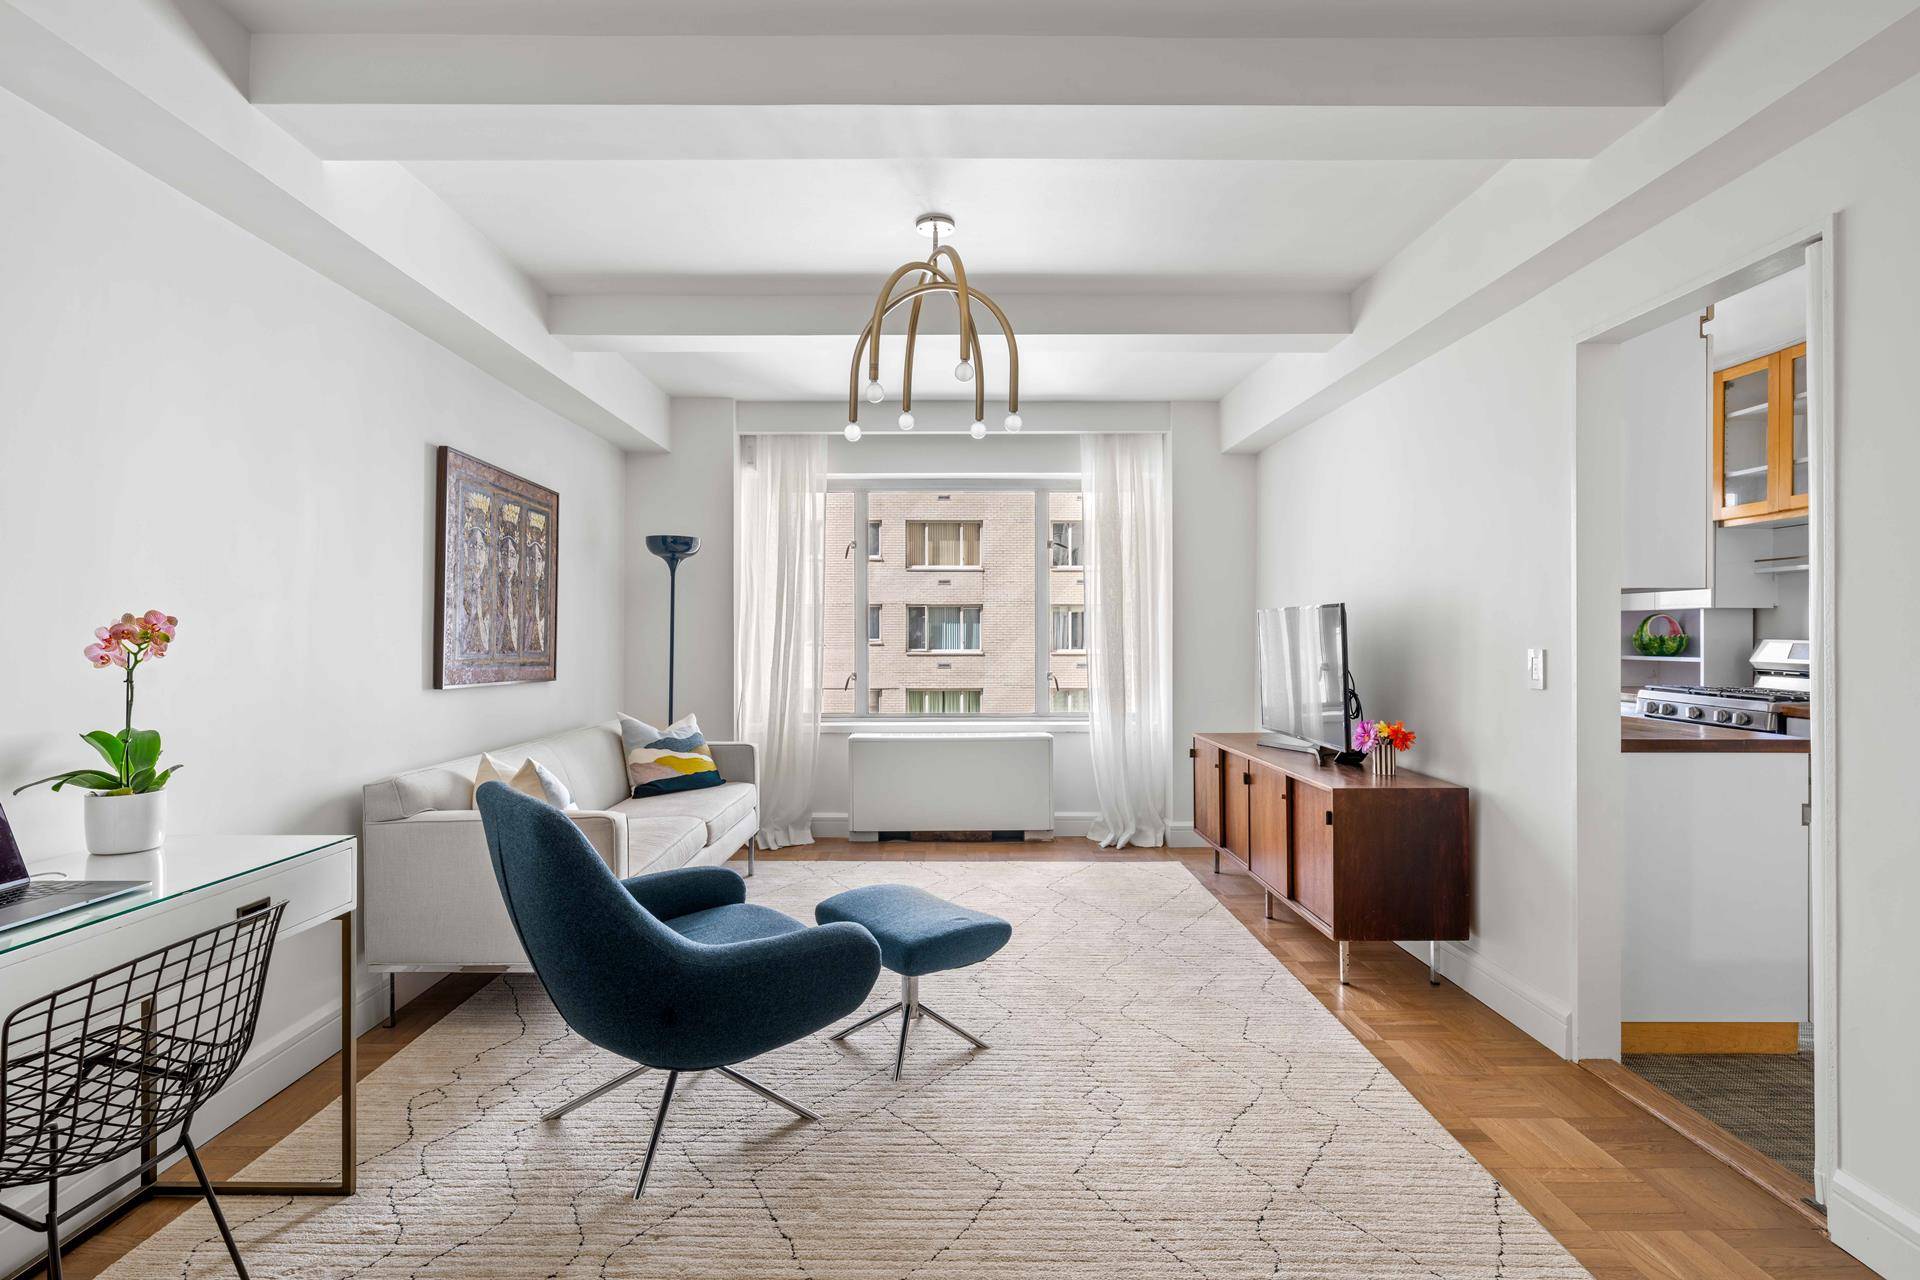 Welcome to 200 East 57th Street, where luxury meets convenience in the heart of Midtown East.